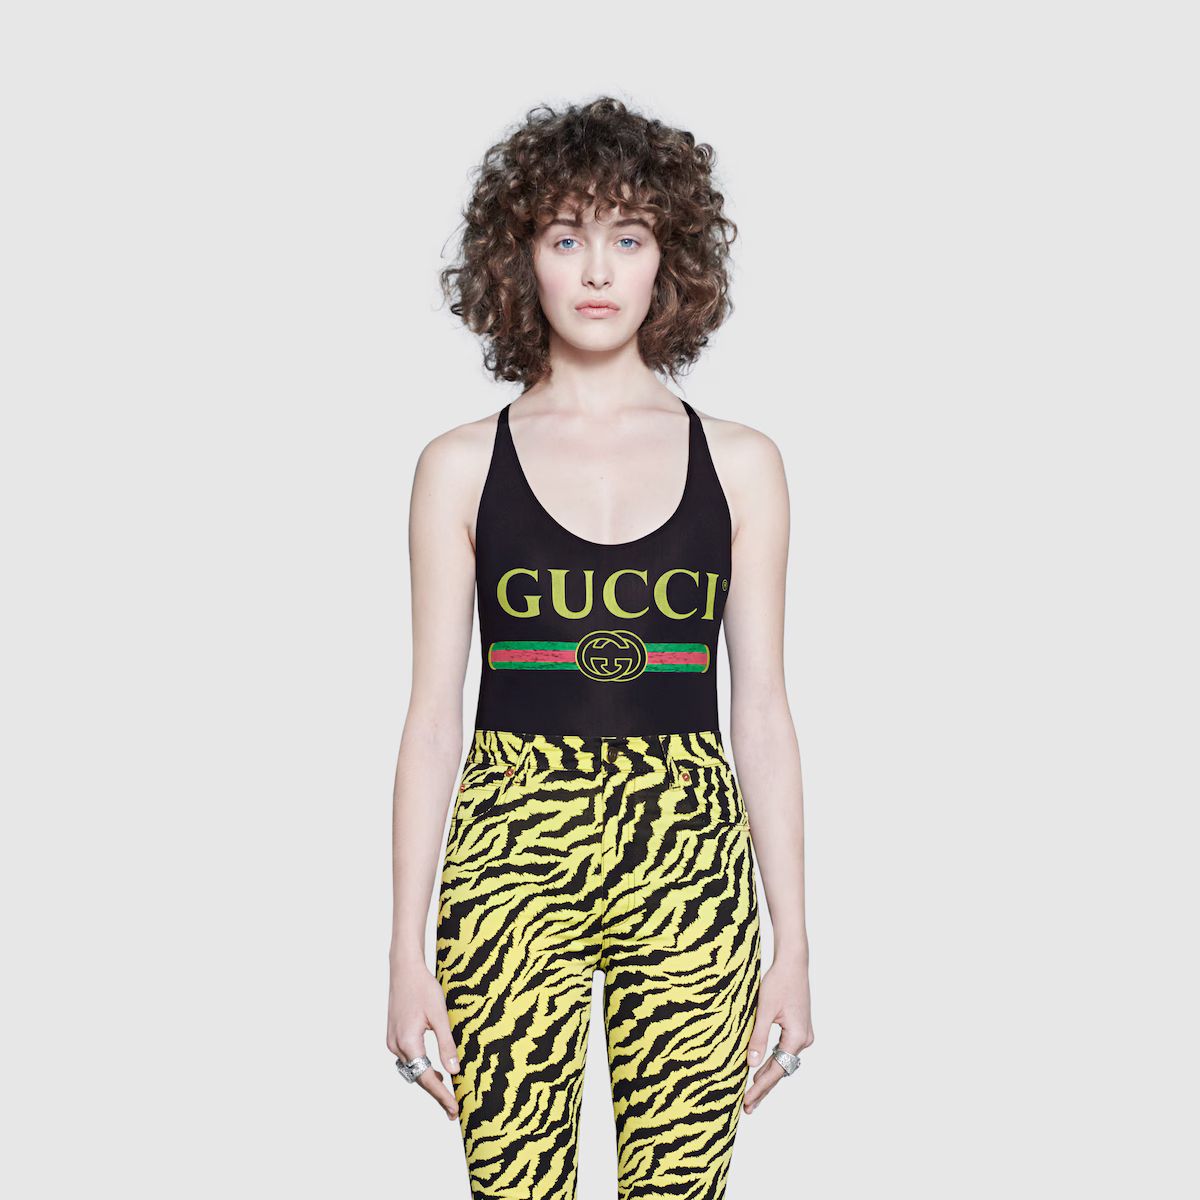 Gucci - Sparkling swimsuit with Gucci logo | Gucci (US)